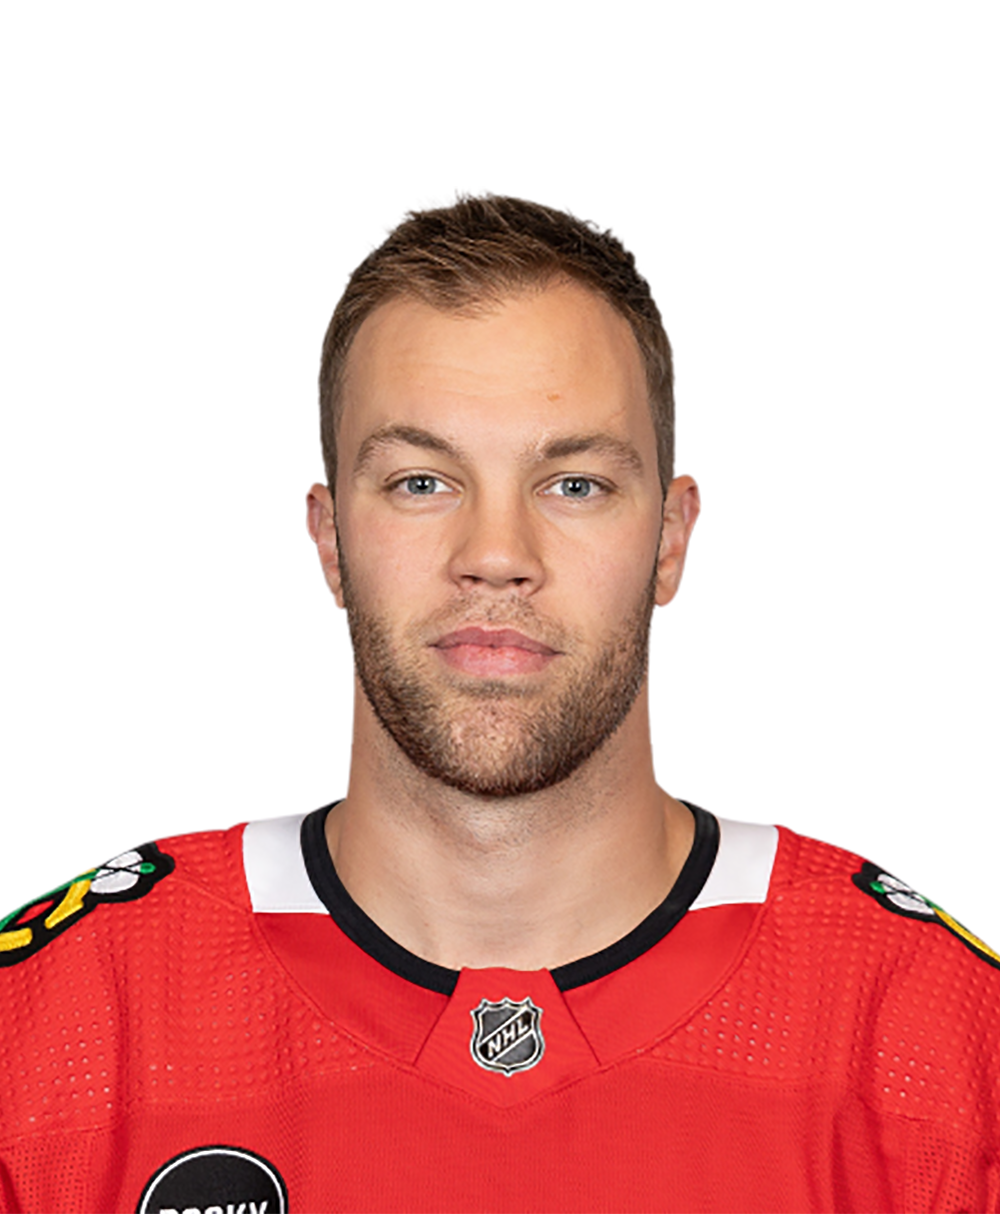 Bruins Make It Official, Sign Taylor Hall For Four Years, $24 Million